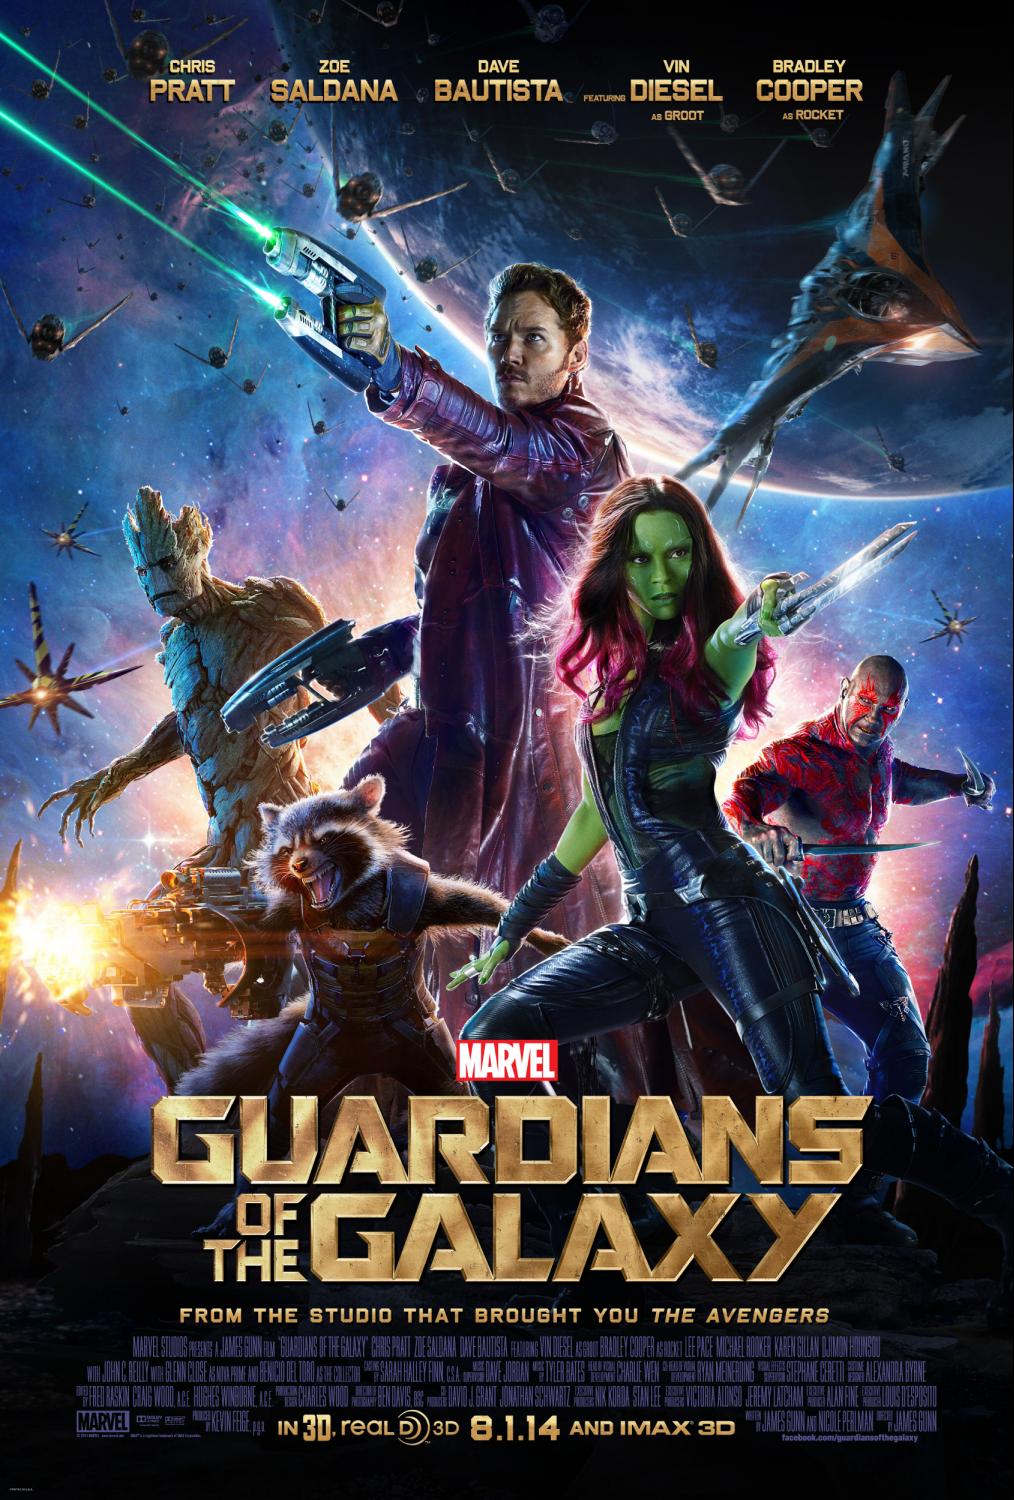 Are you ready for MARVEL’S GUARDIANS OF THE GALAXY Character Posters?